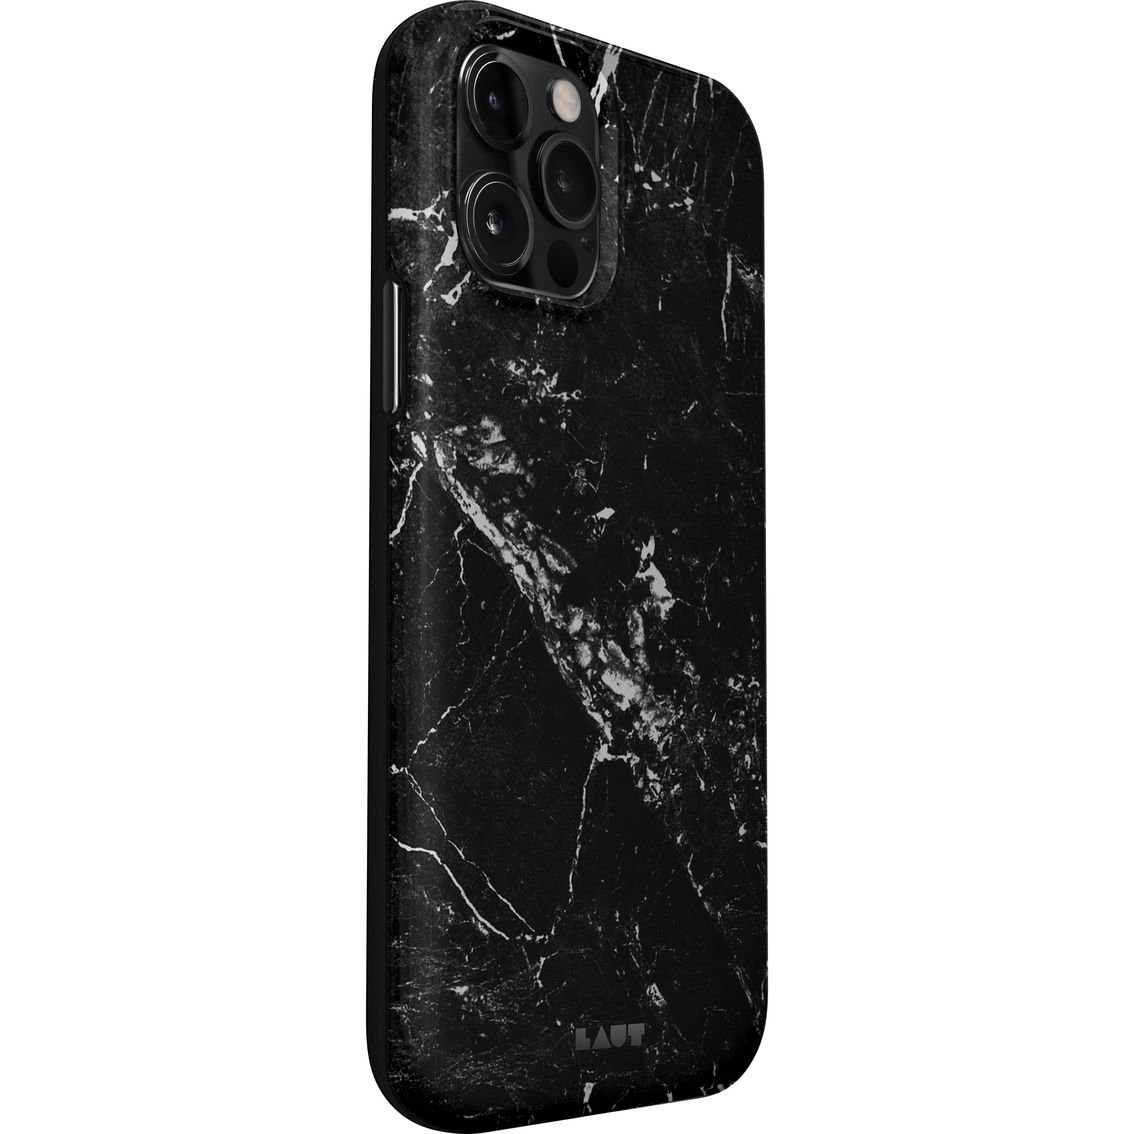 LAUT Design USA Huex Elements Case for Apple iPhone 12 Pro Max - Image 5 of 5